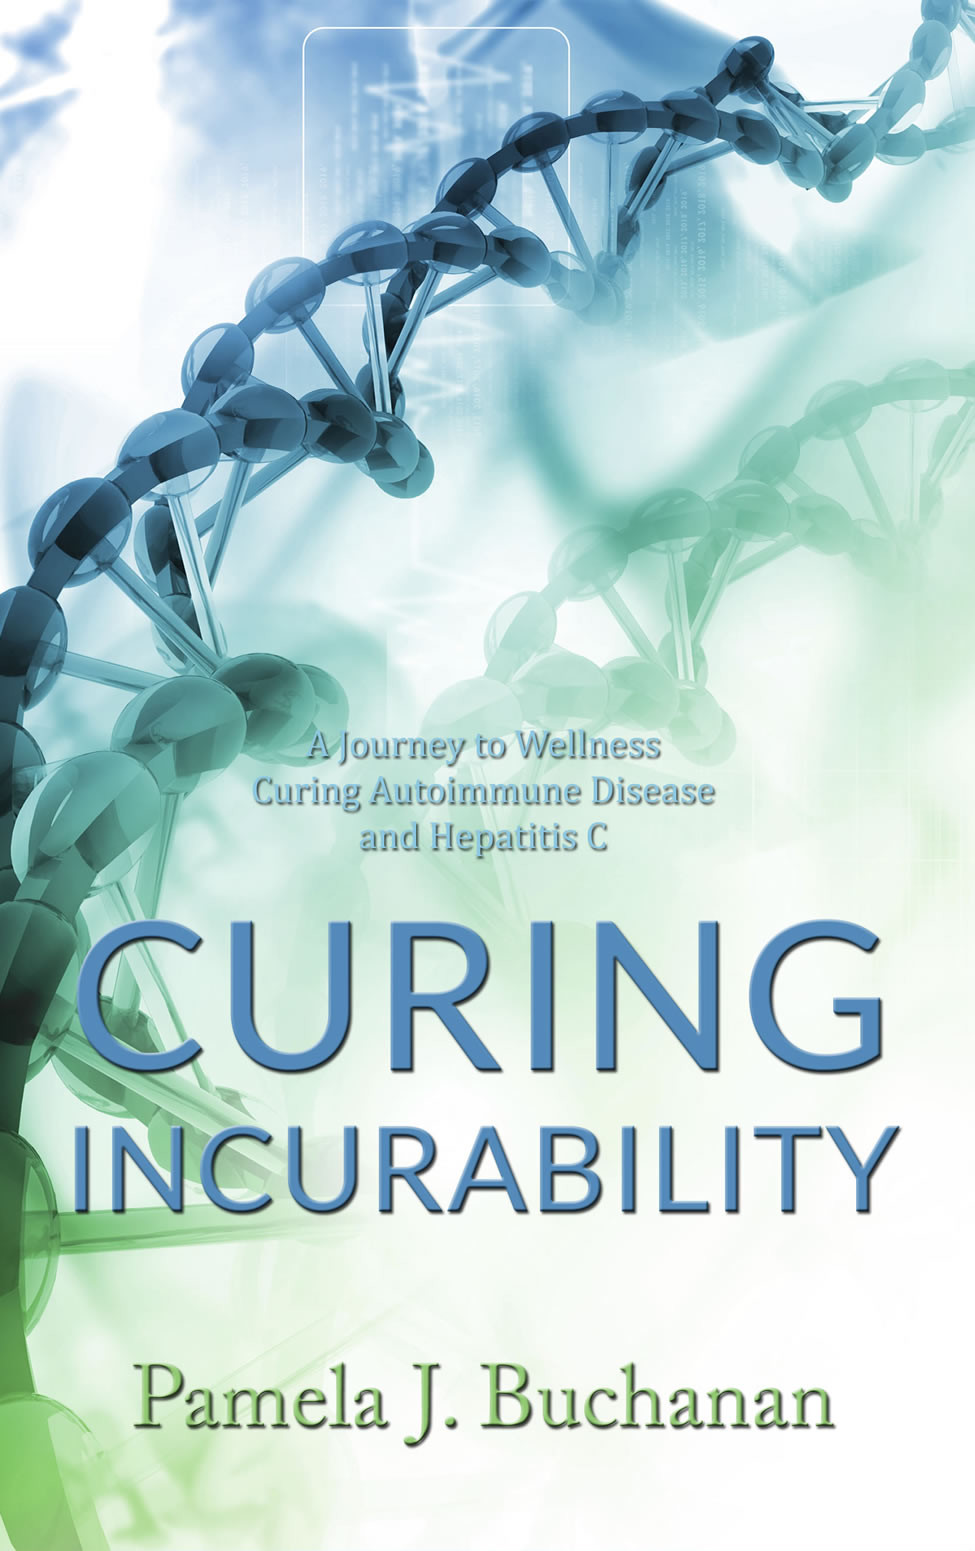 Curing Incurability